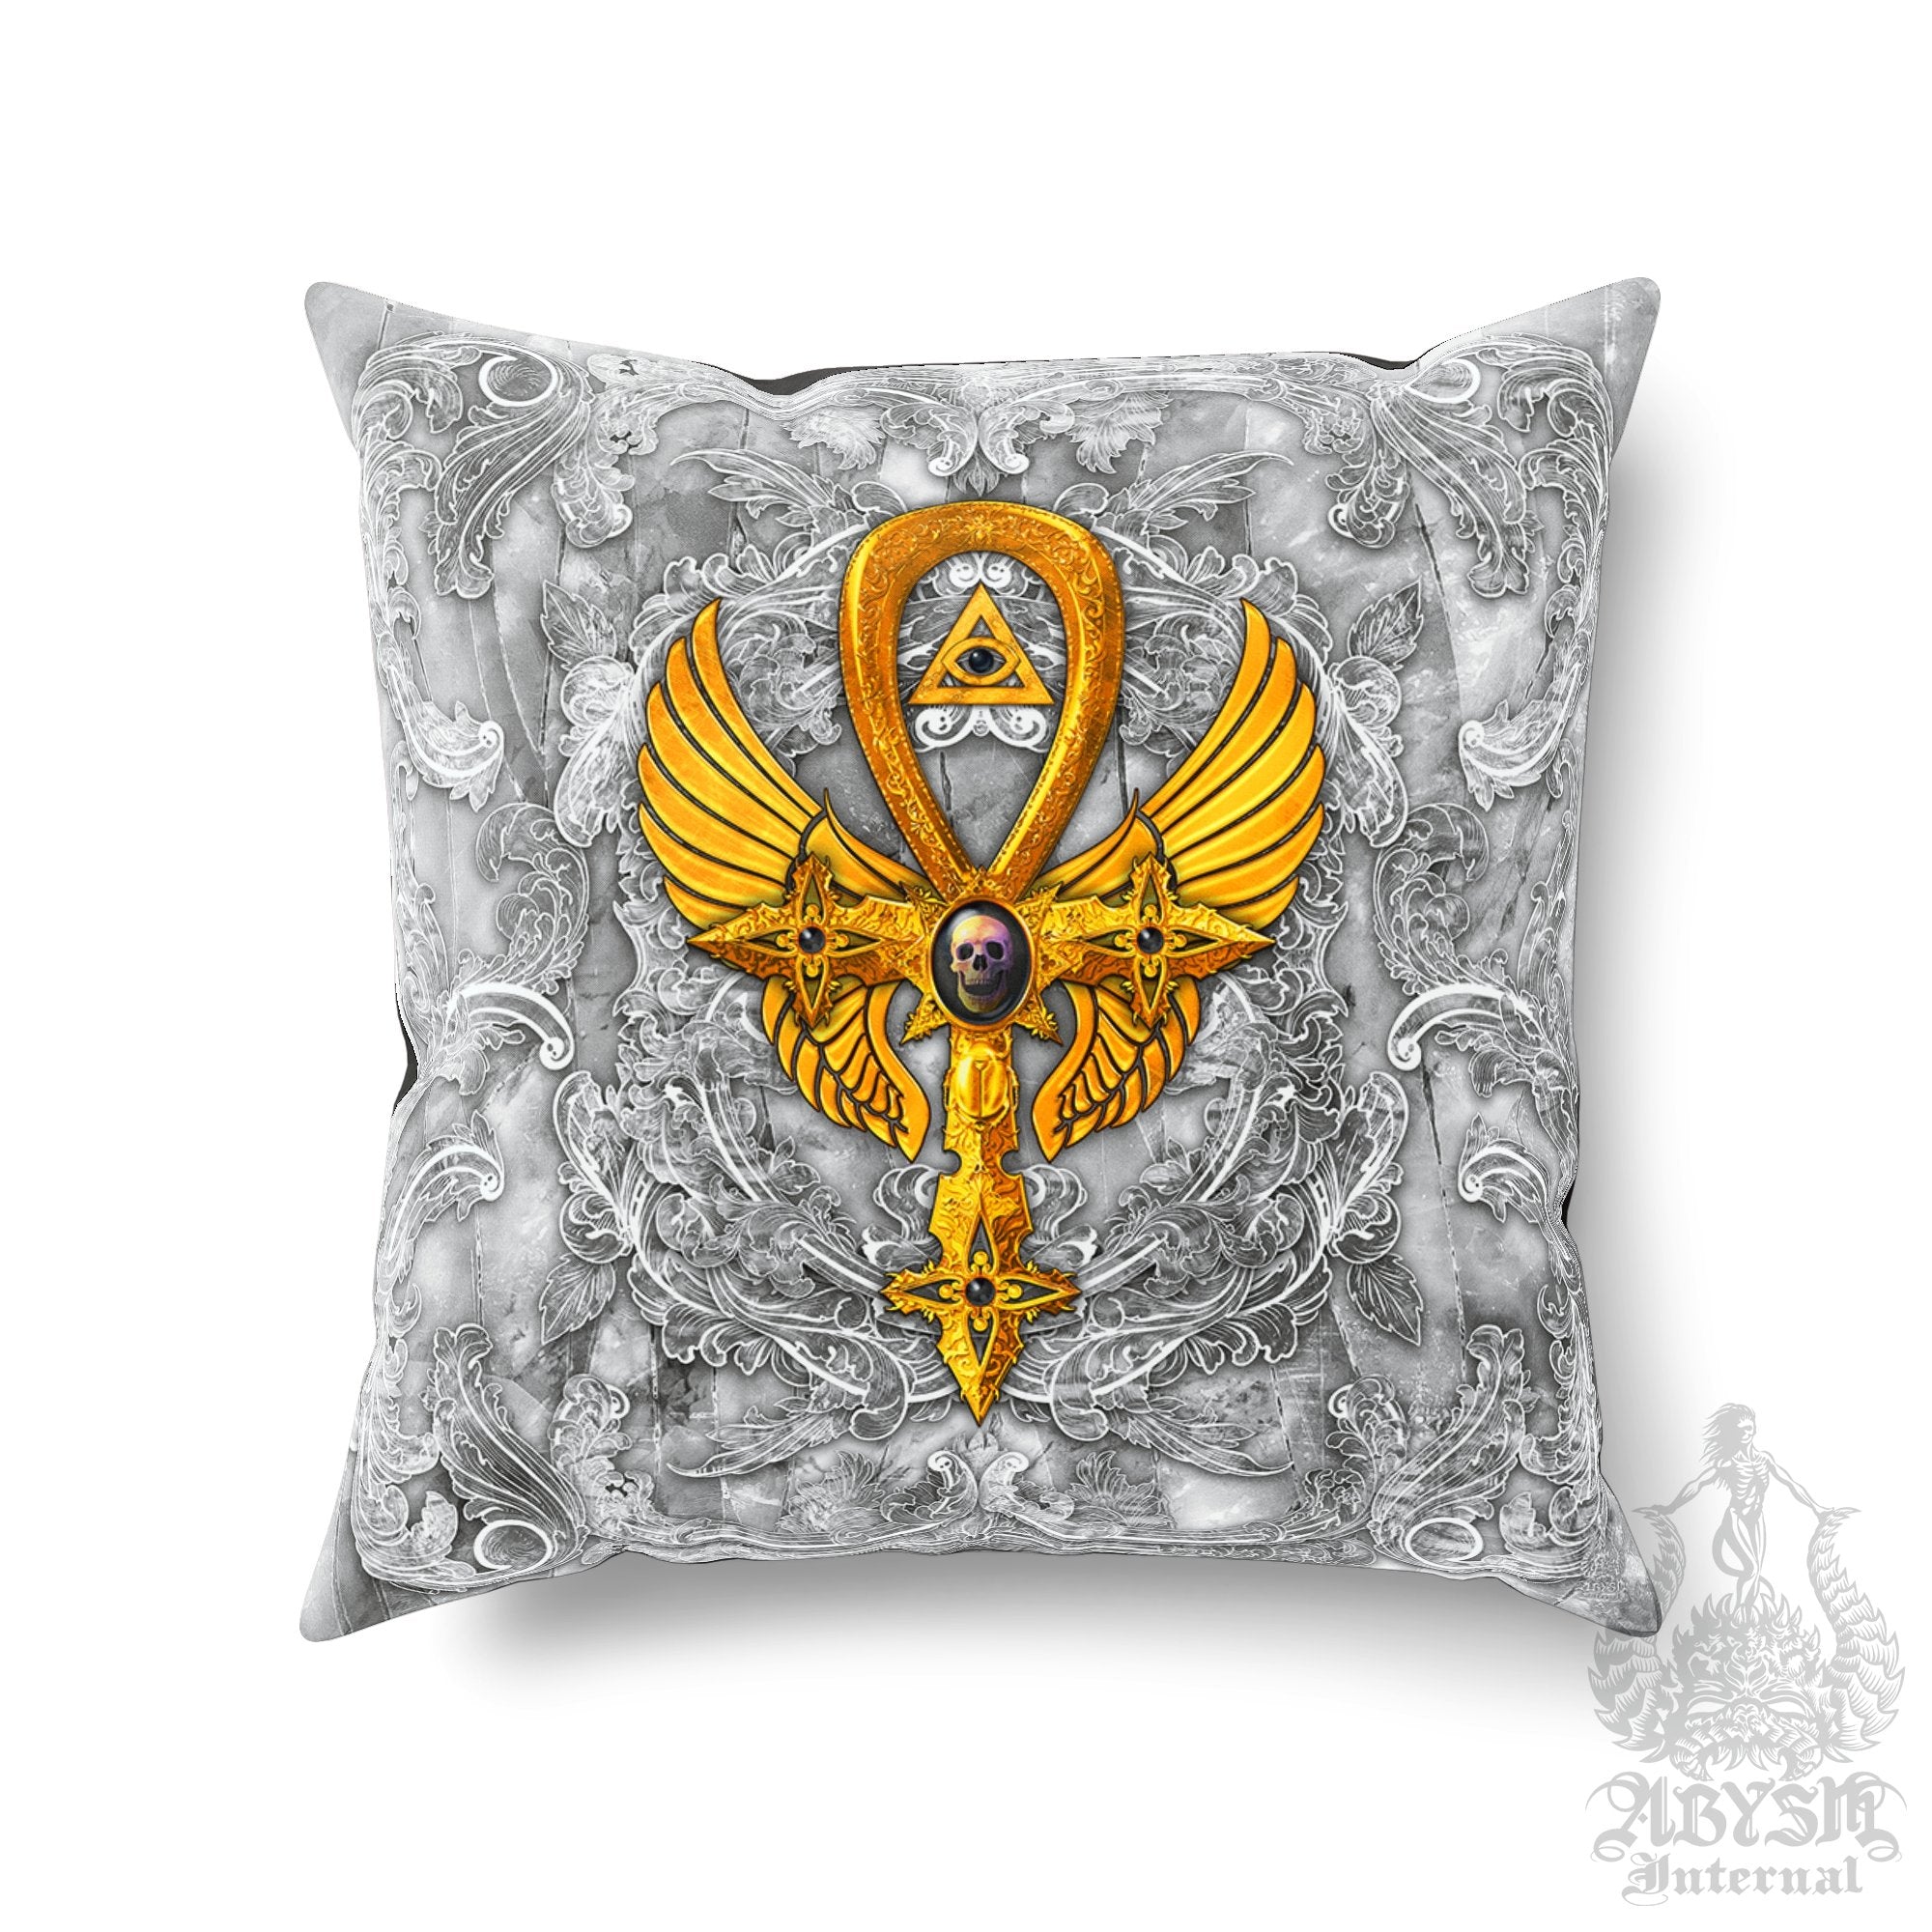 White Goth Throw Pillow, Decorative Accent Cushion, Gothic Room Decor, Occult Art, Alternative Home - Ankh, Stone Gold - Abysm Internal